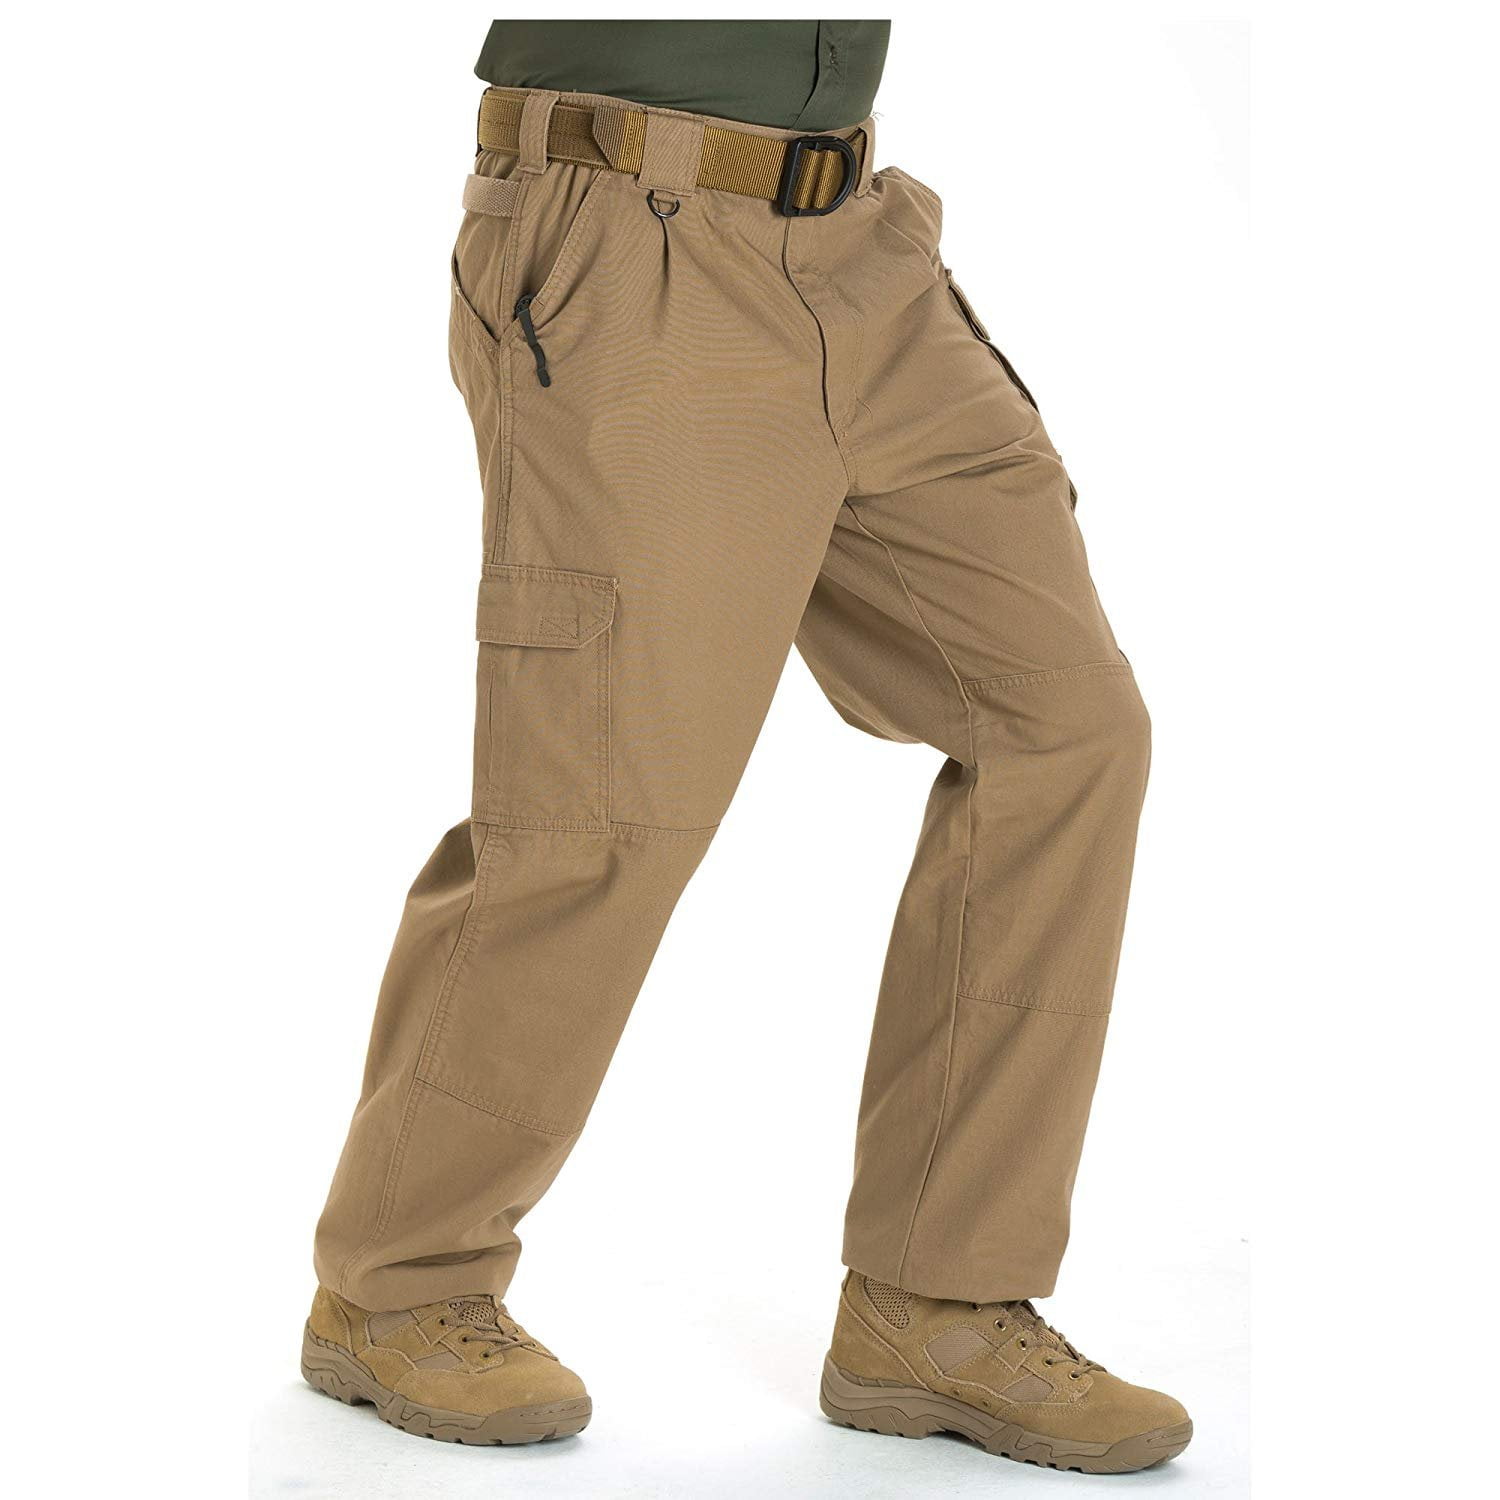 5.11 trousers